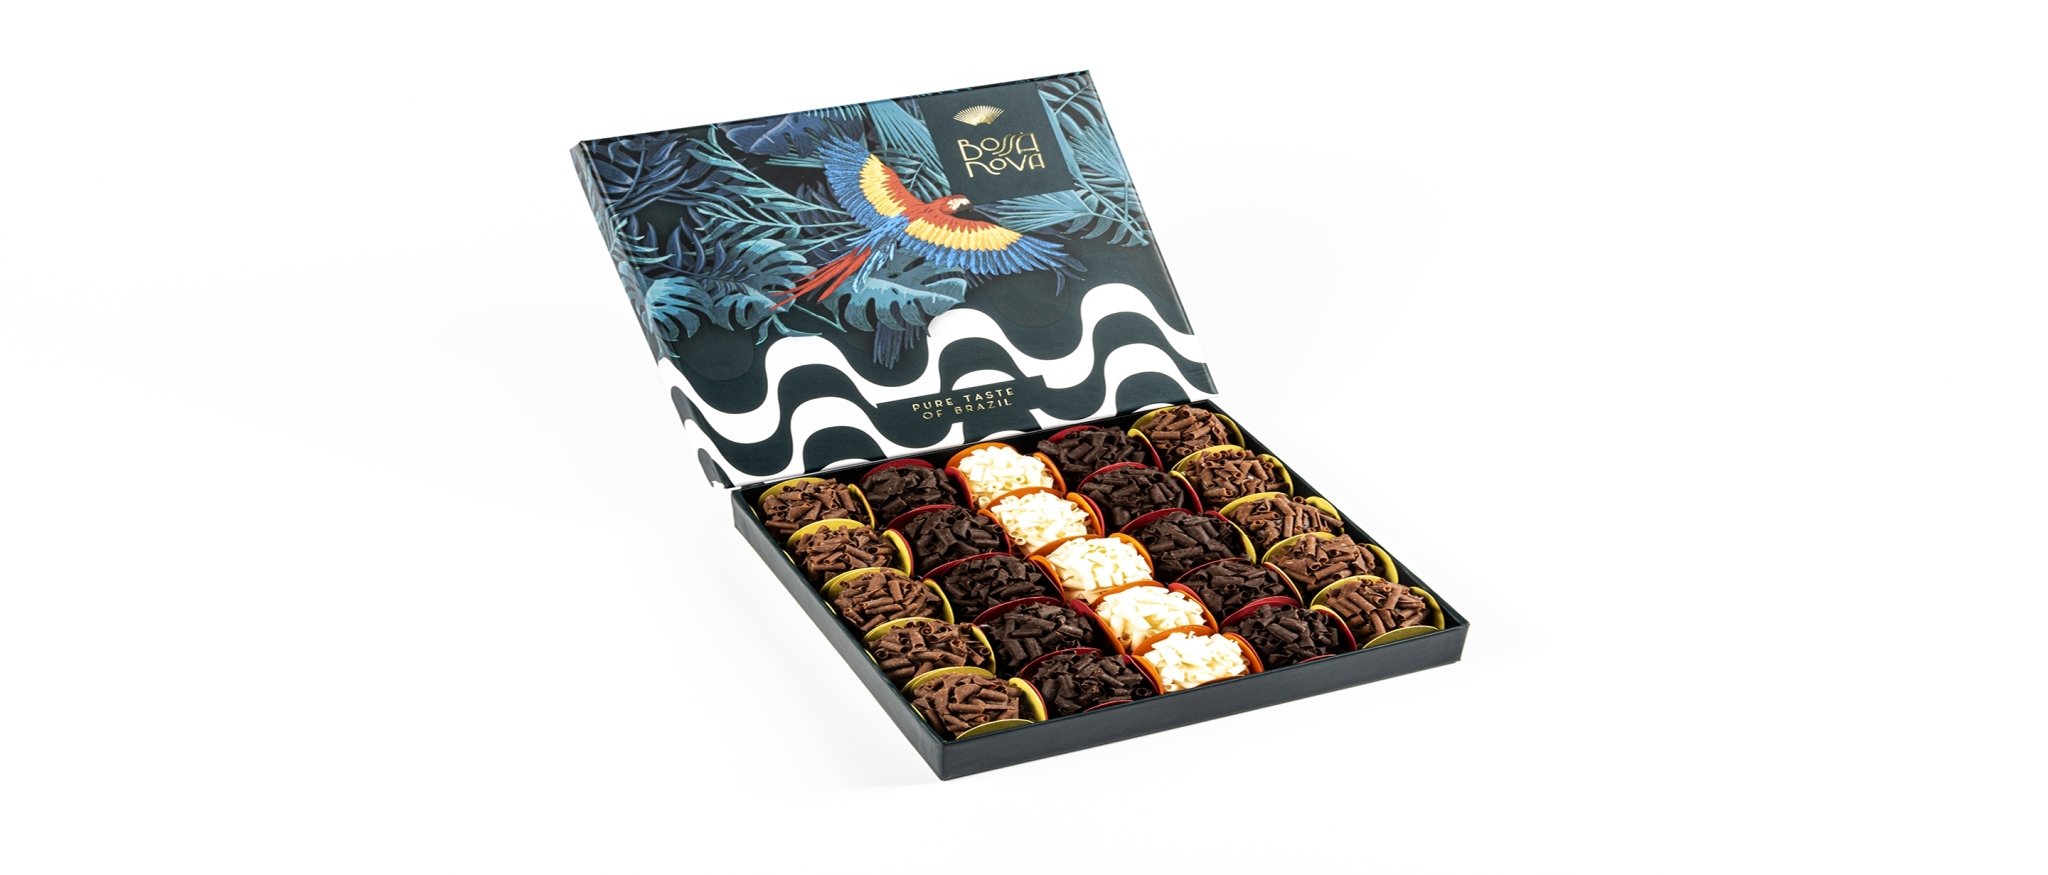 Luxury Gluten-free Chocolate Gifts for Children Collection from Bossa Nova Chocolate